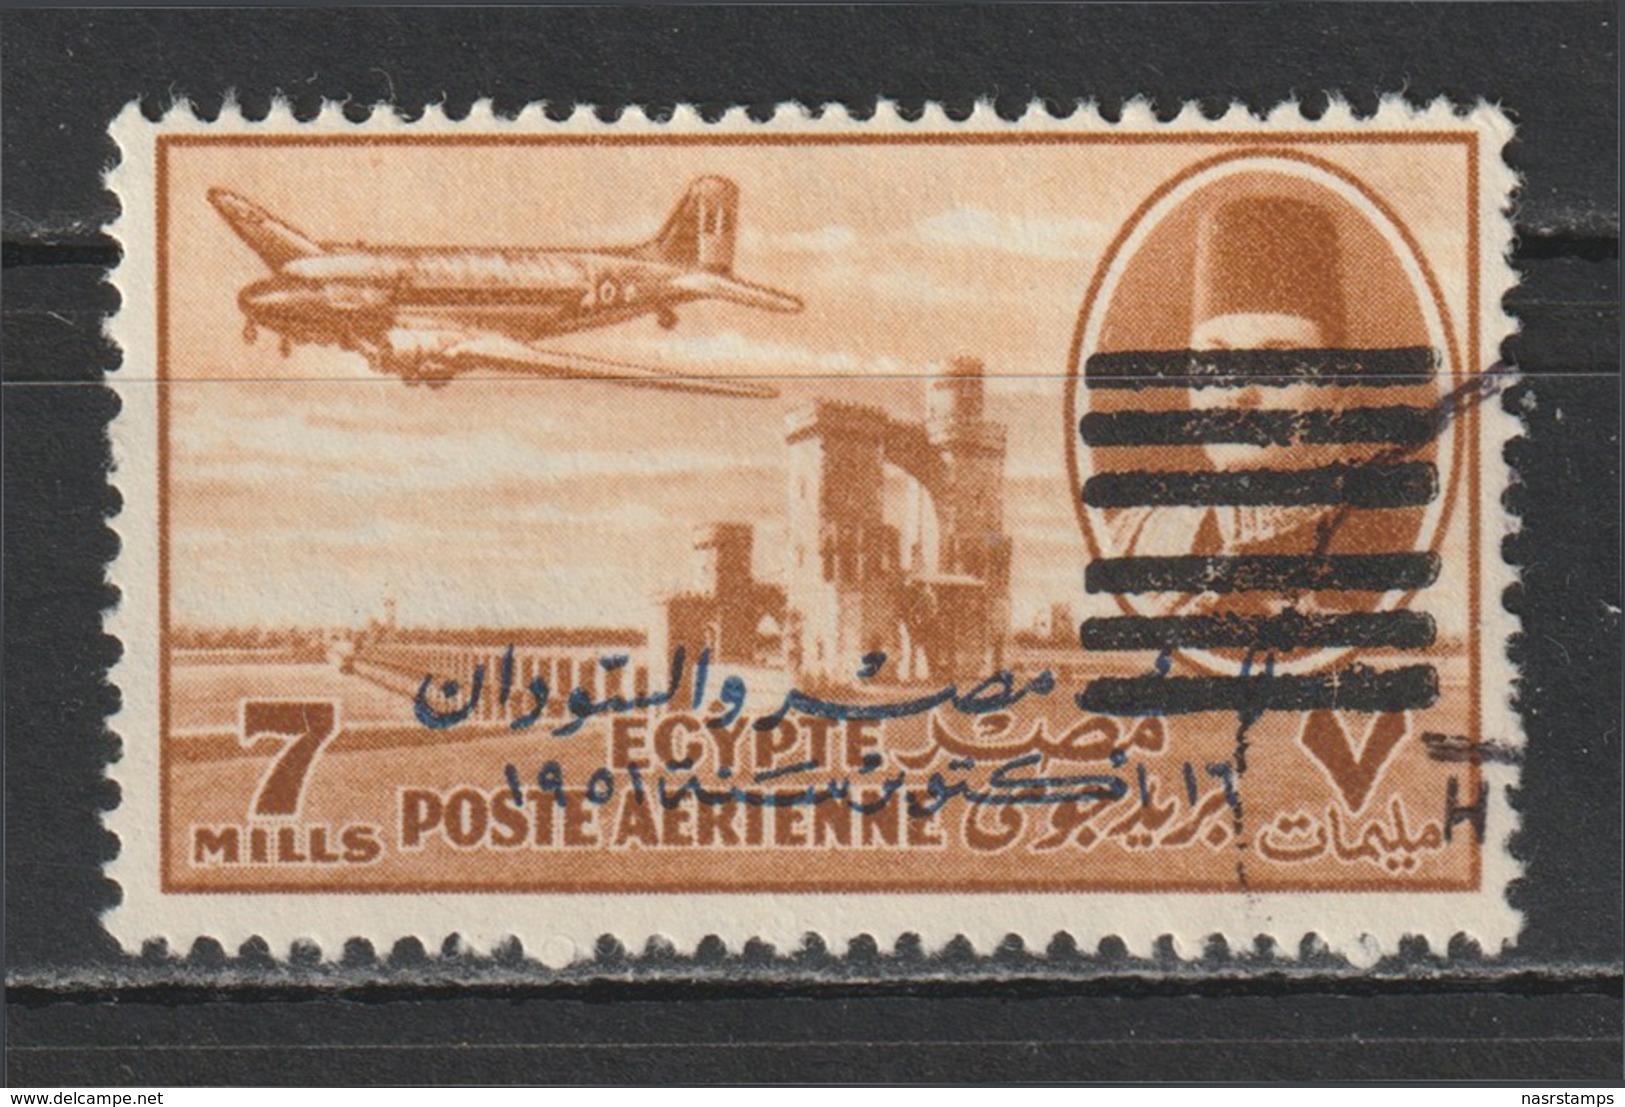 Egypt - 1953 - Unlisted - Unrecorded - Scarce - ( King Farouk - Overprinted 6 Bars On M/s - 7m  ) - Used - No Gum - Oblitérés